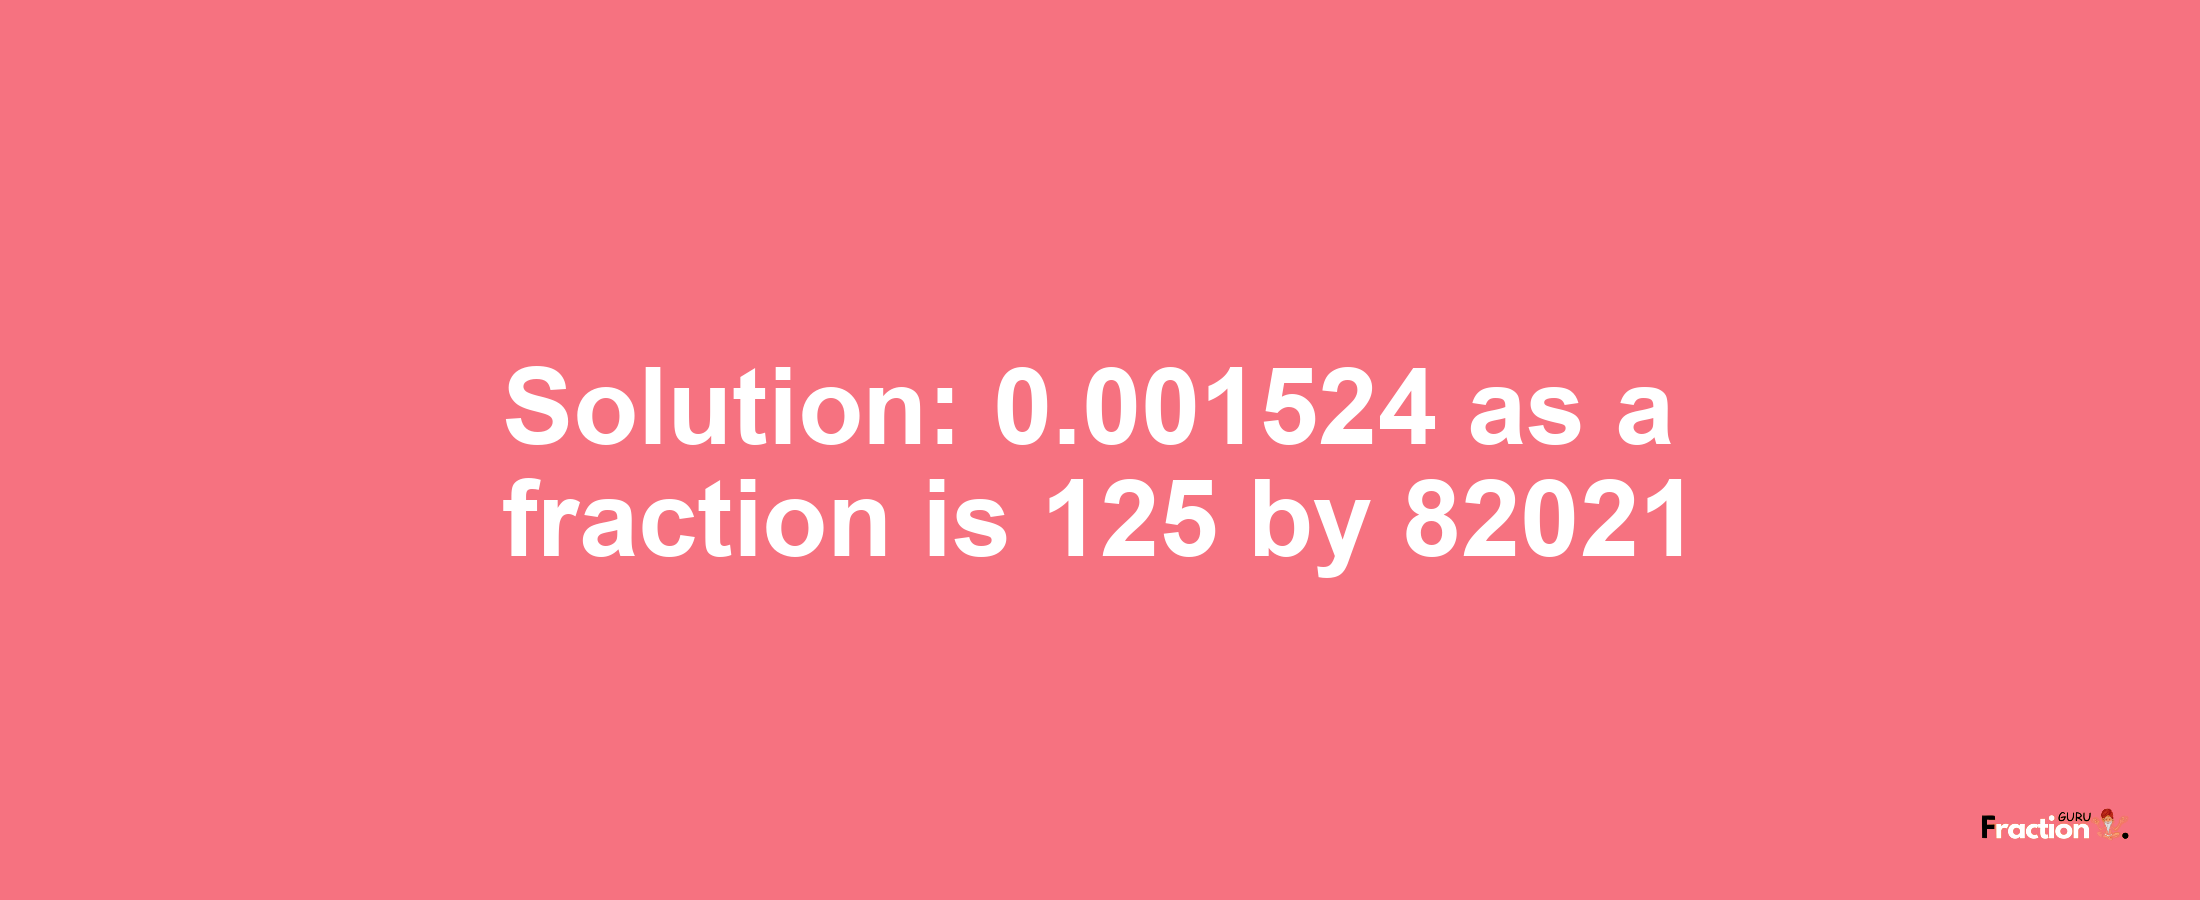 Solution:0.001524 as a fraction is 125/82021